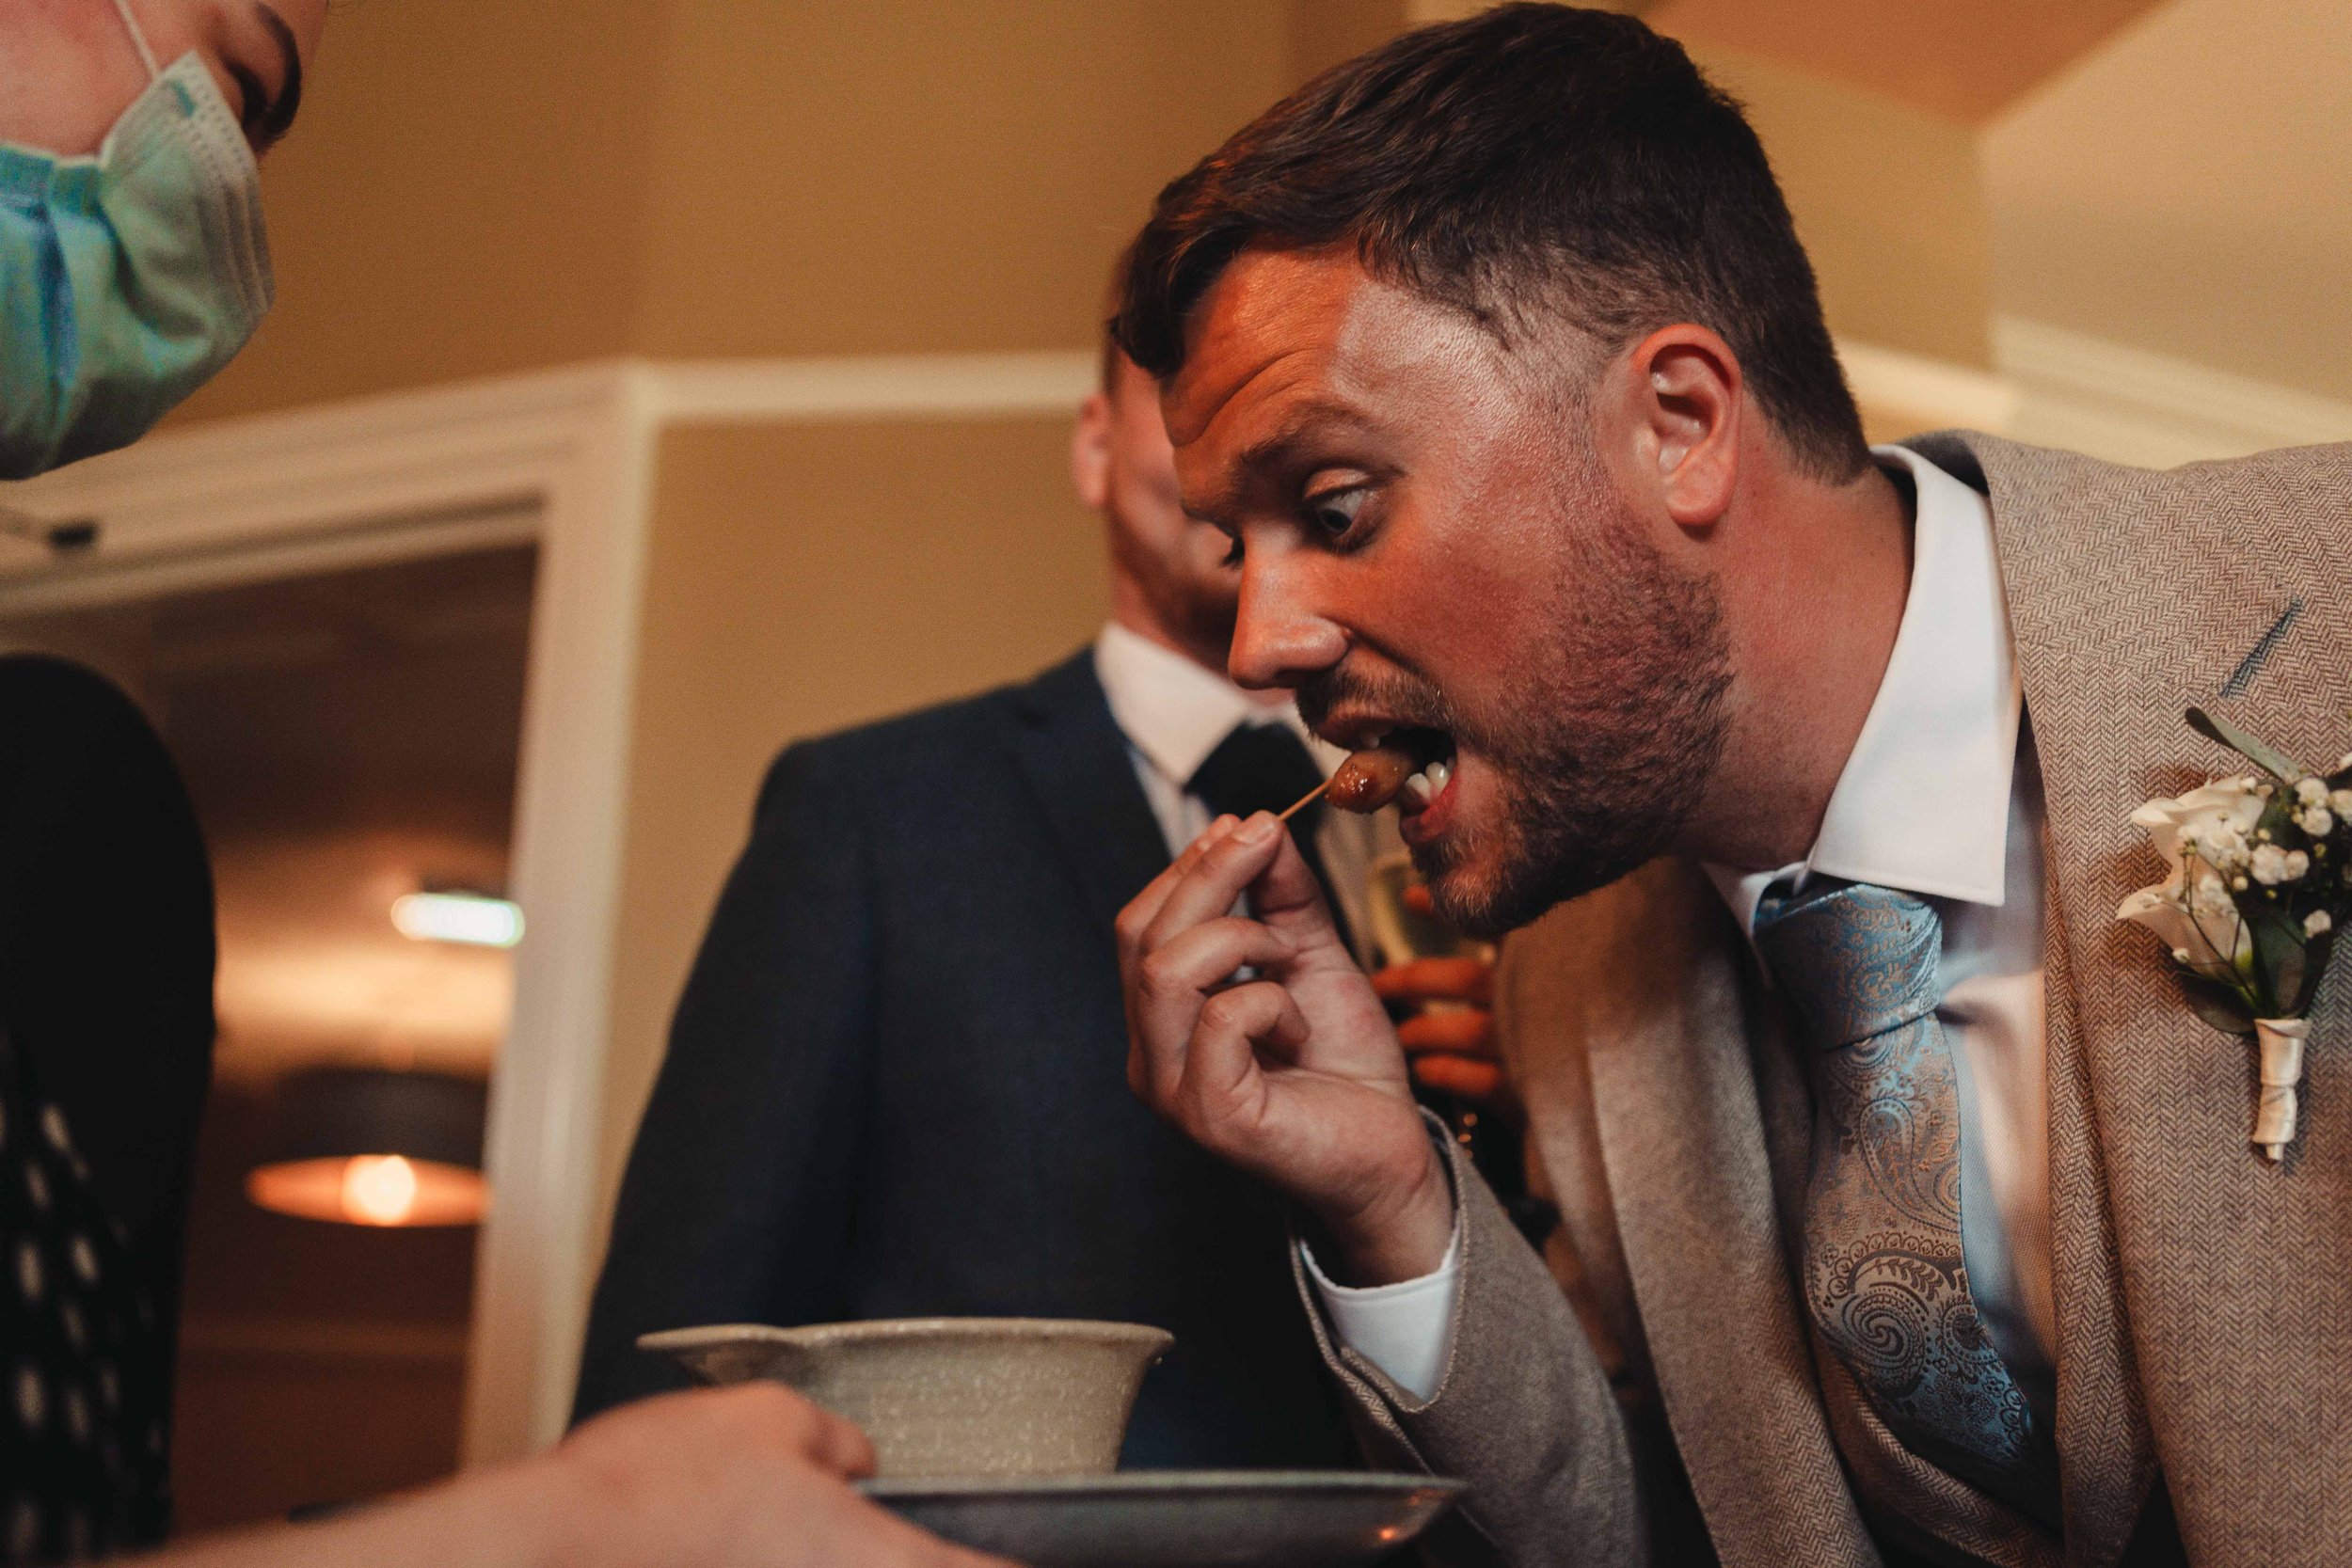 Groom eating a canapes